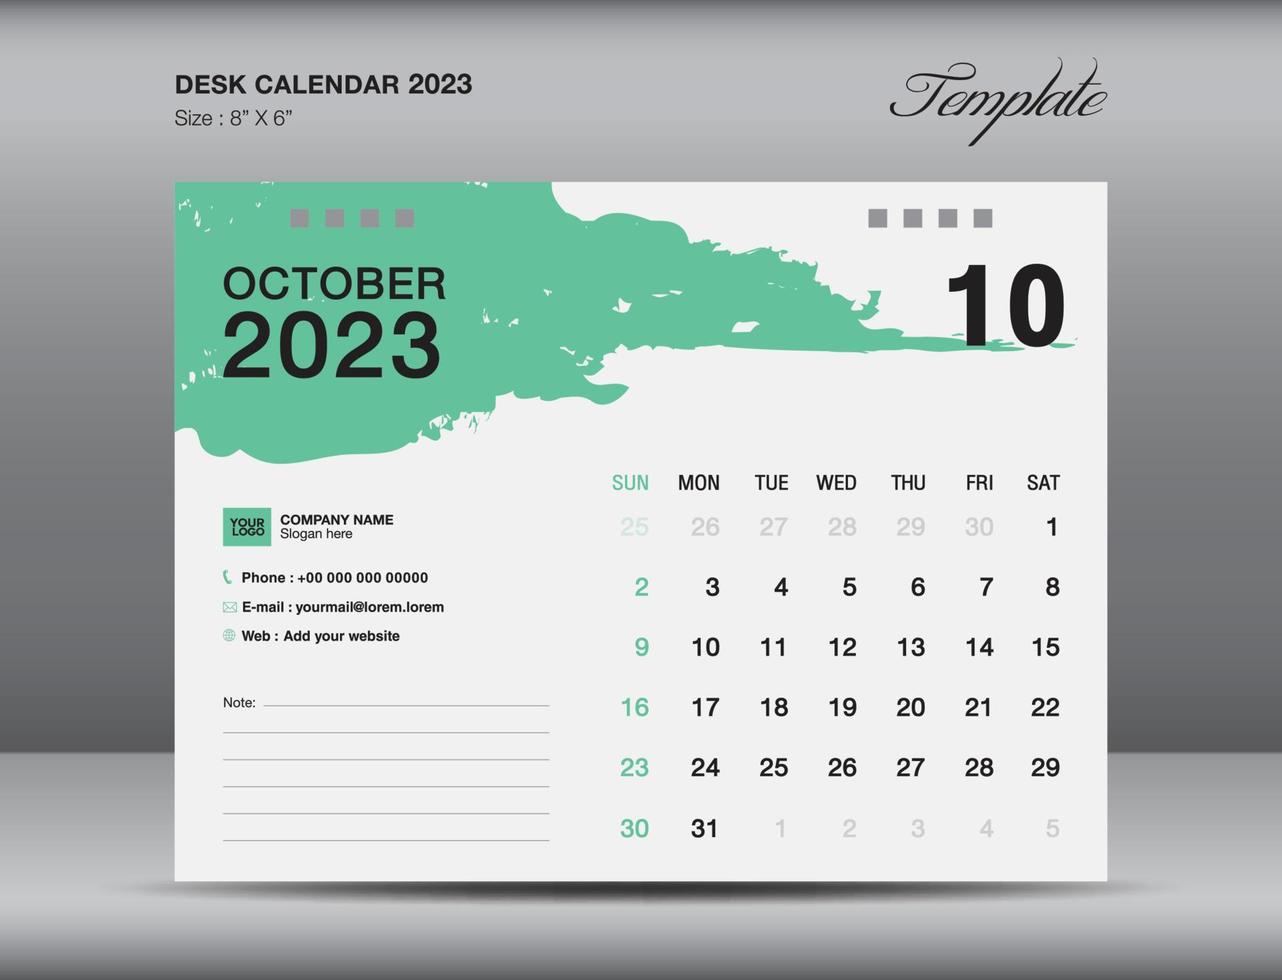 Calendrier 2023 simple